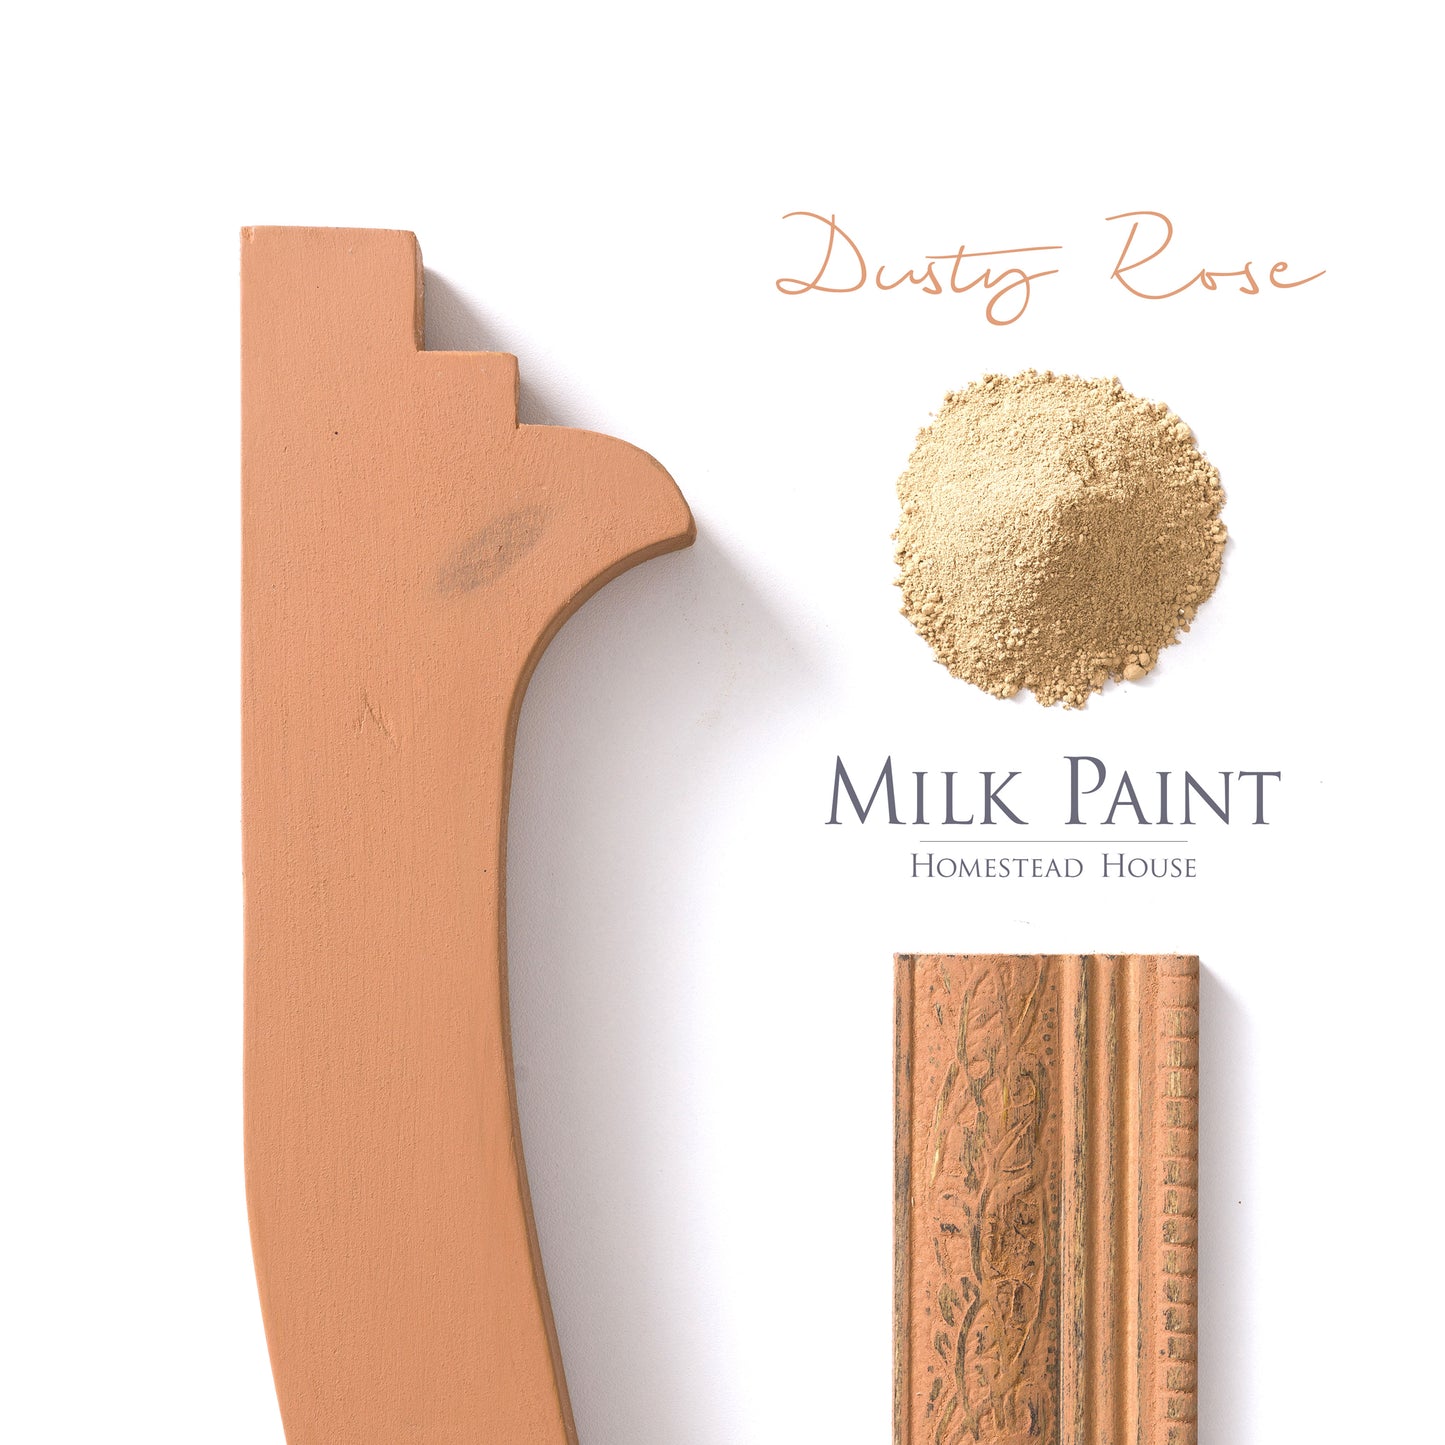 Milk Paint from Homestead House in Dusty Rose, a muted terra-cotta pink.  |  homesteadhouse.ca